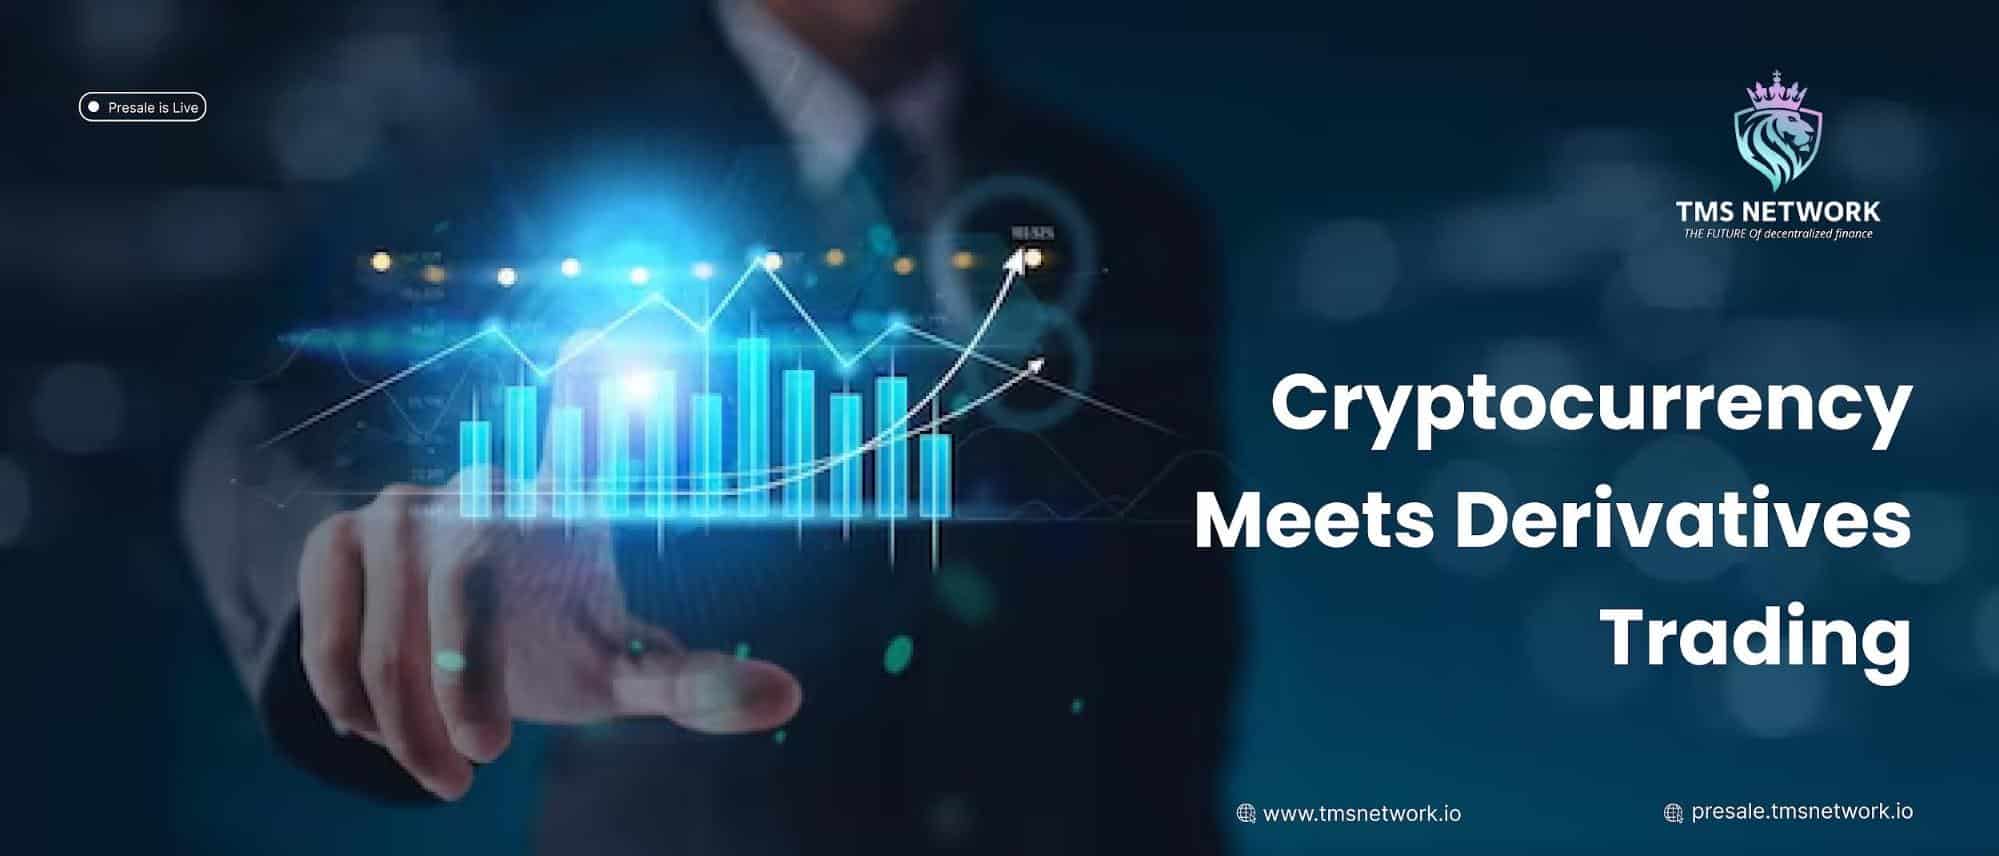 Why NEM (XEM), Stacks (STX), and TMS Network (TMSN) are Absolutely Dominating Crypto Charts These Days?